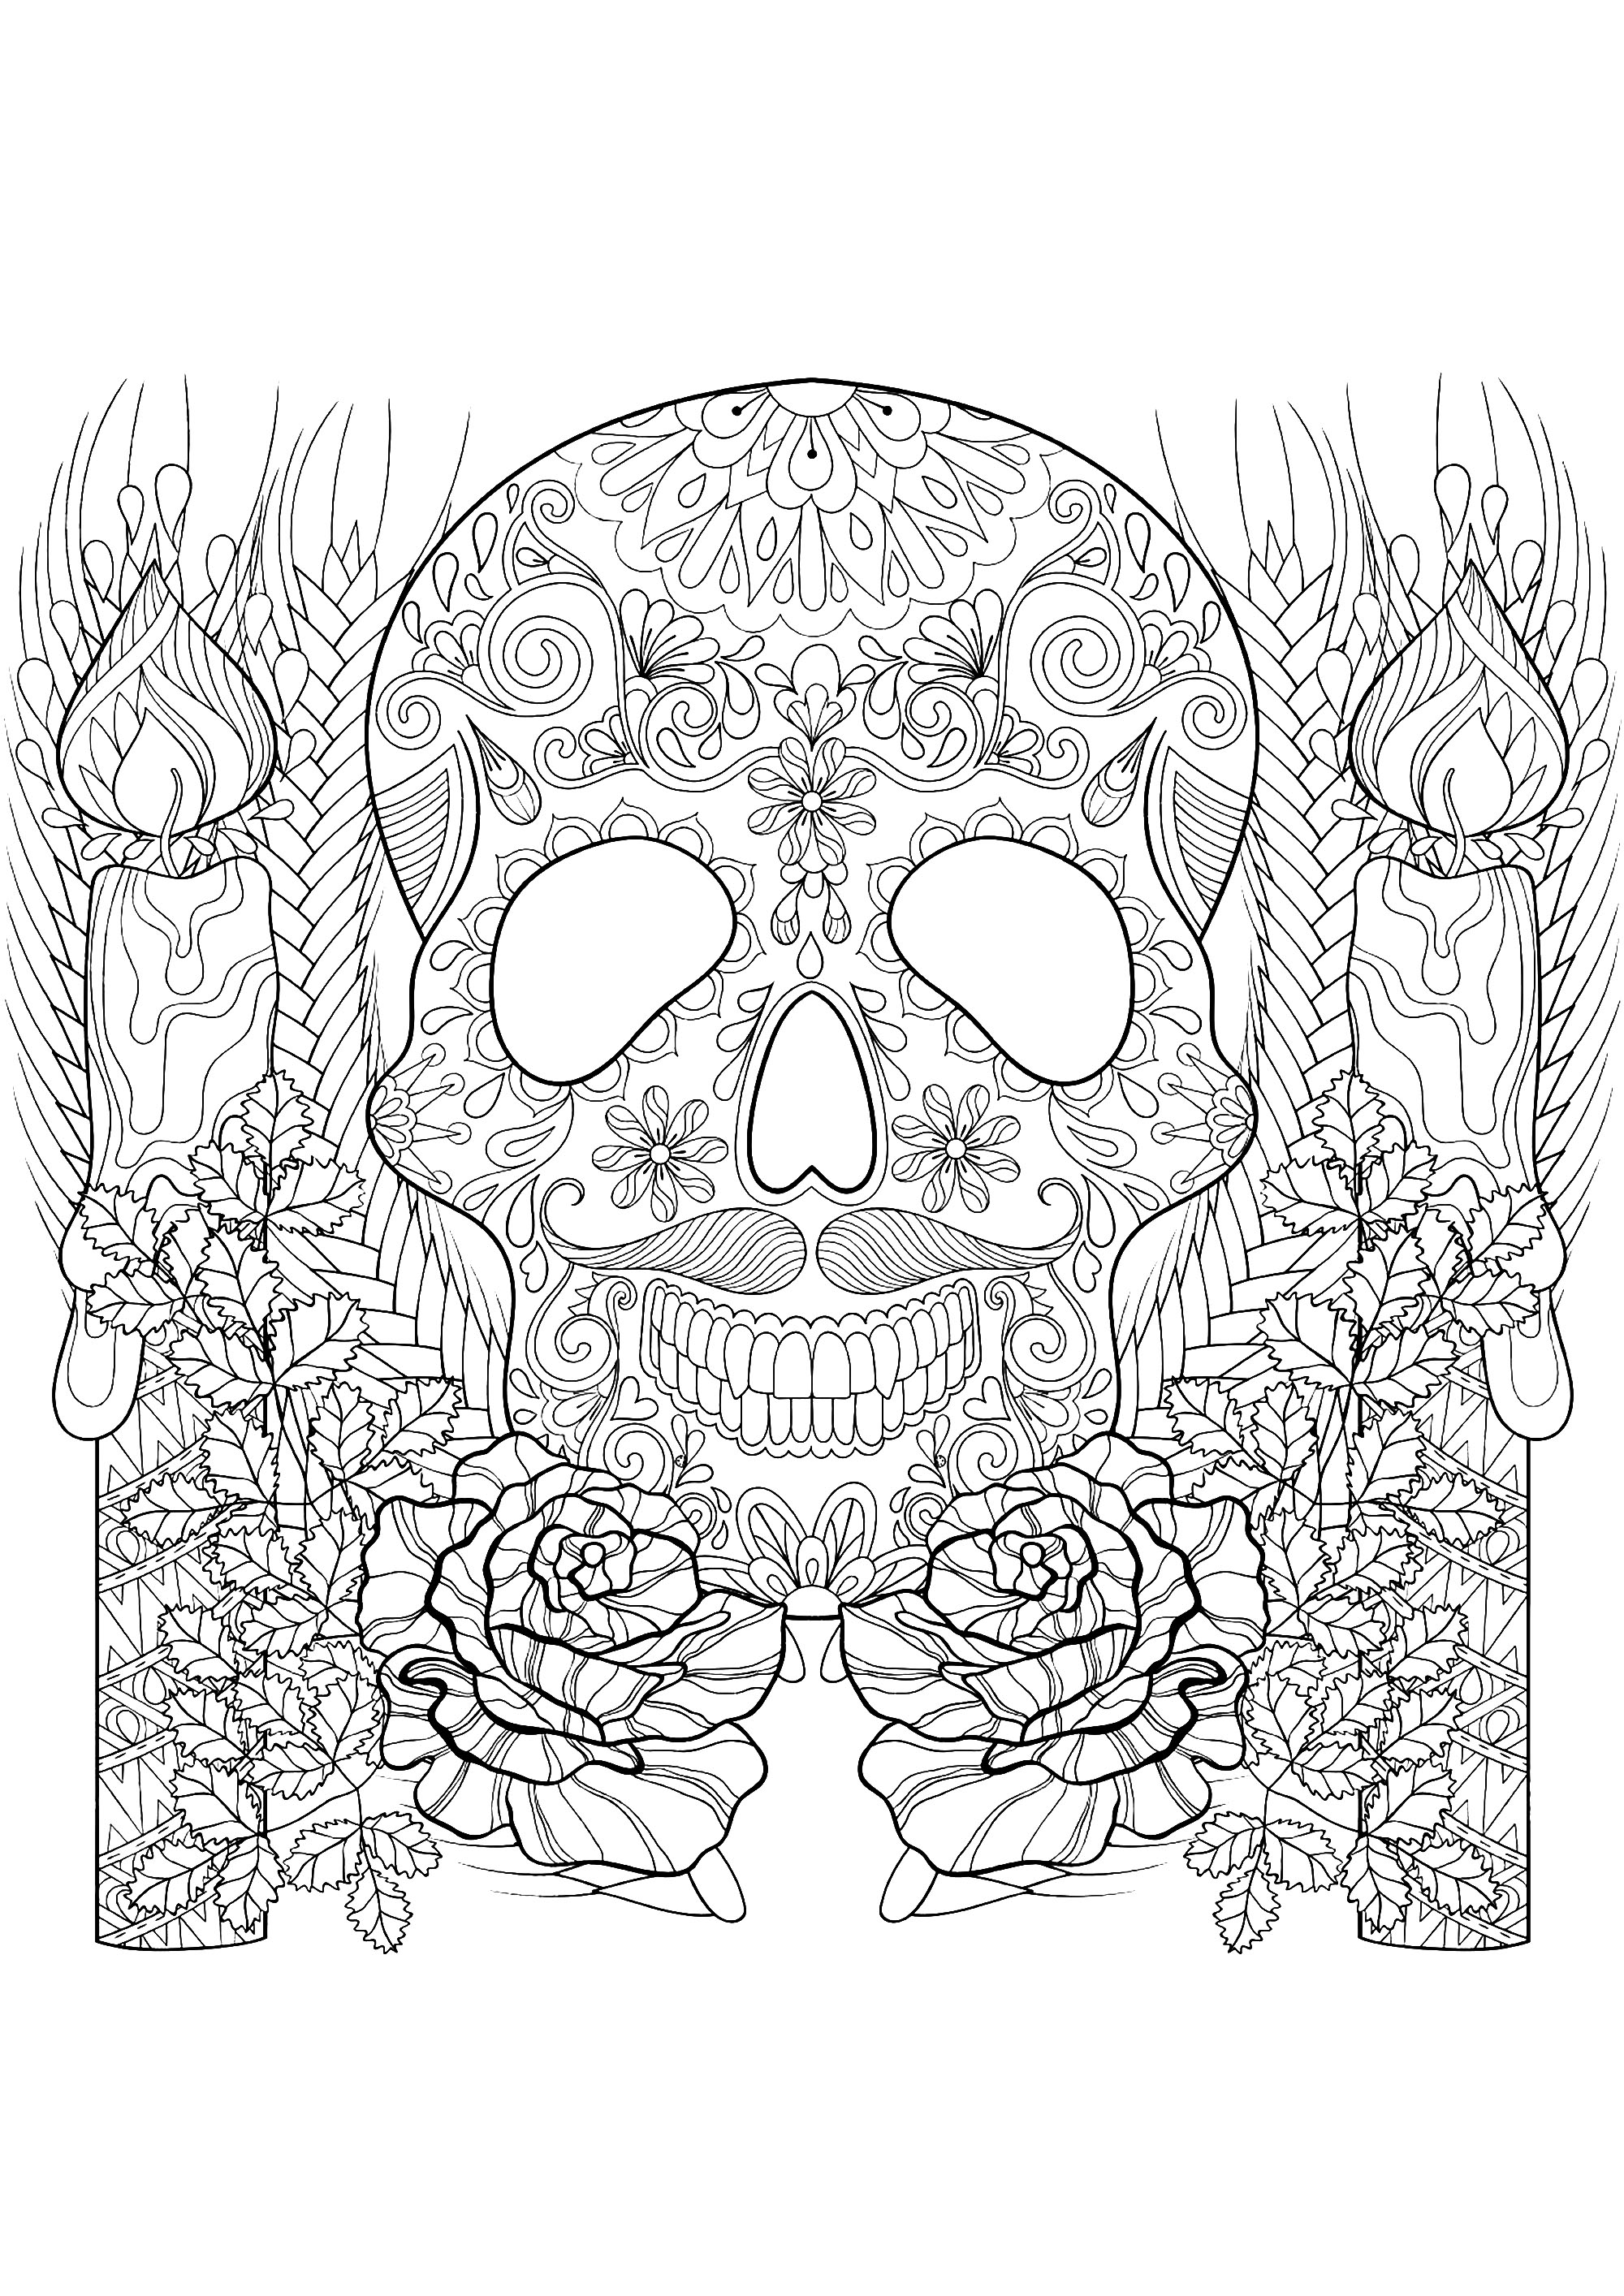 Skull and candles - Halloween Adult Coloring Pages